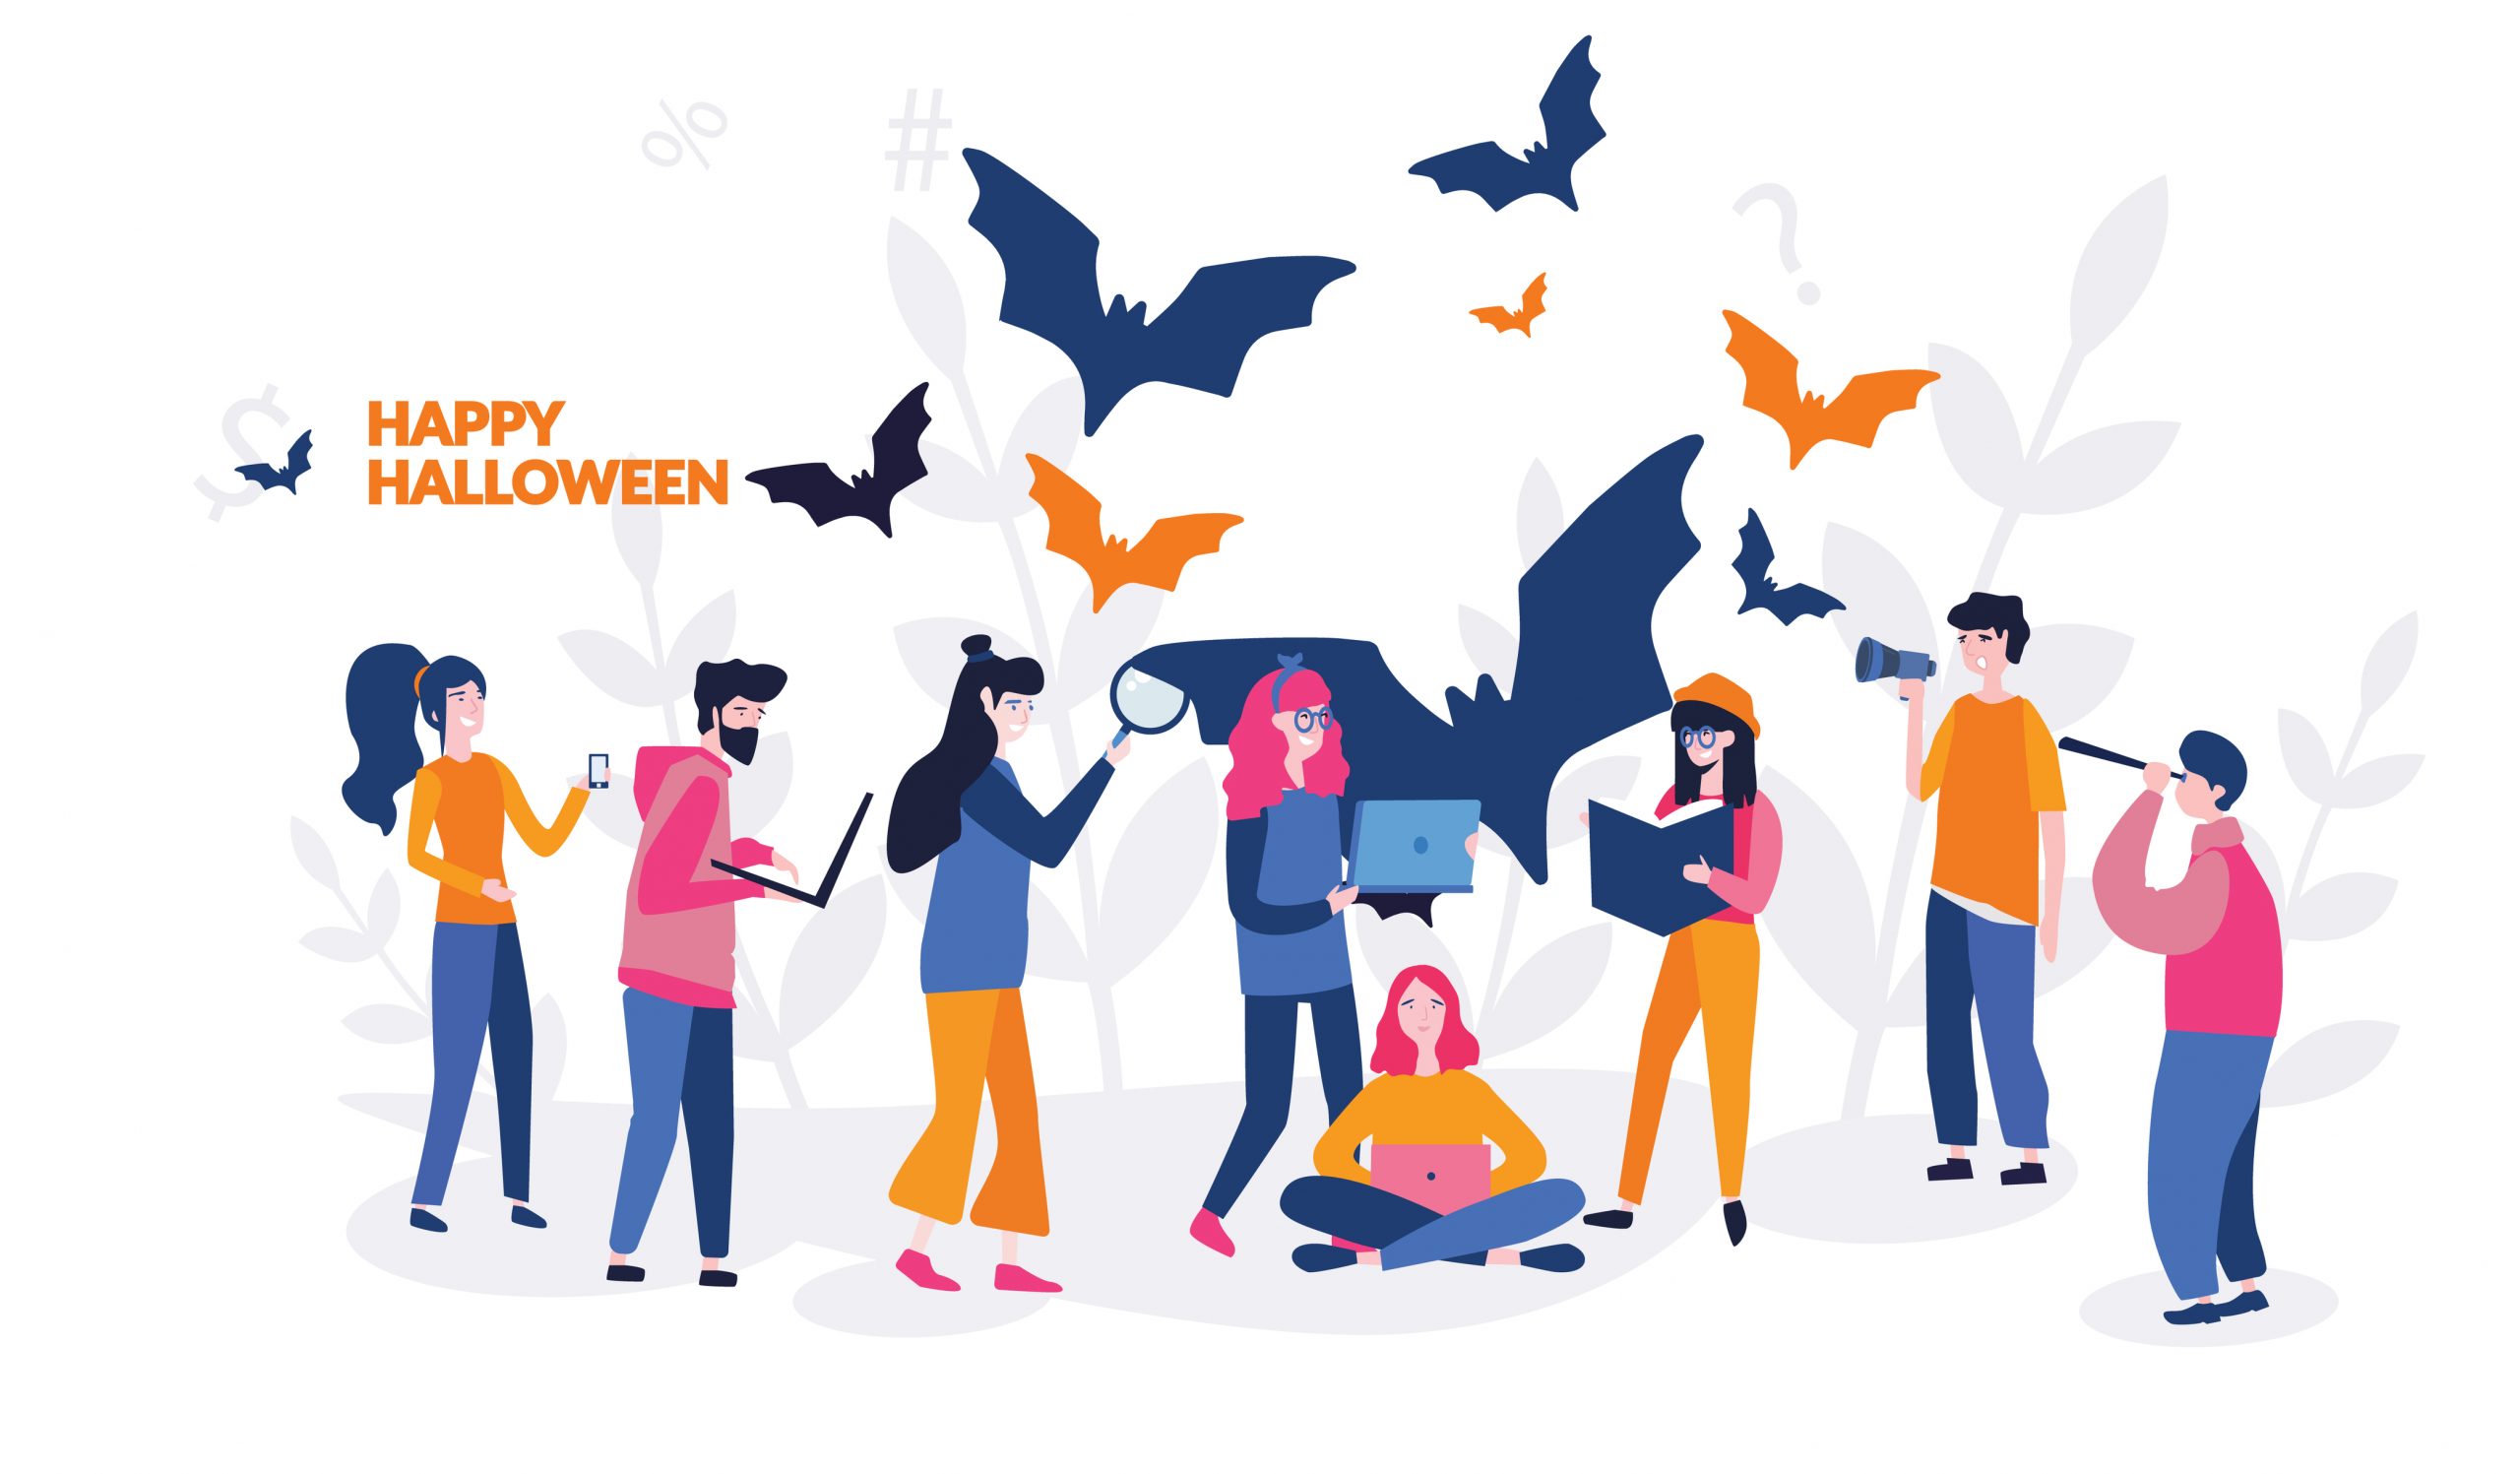 5 Ideas for a Spooky Halloween Office Party